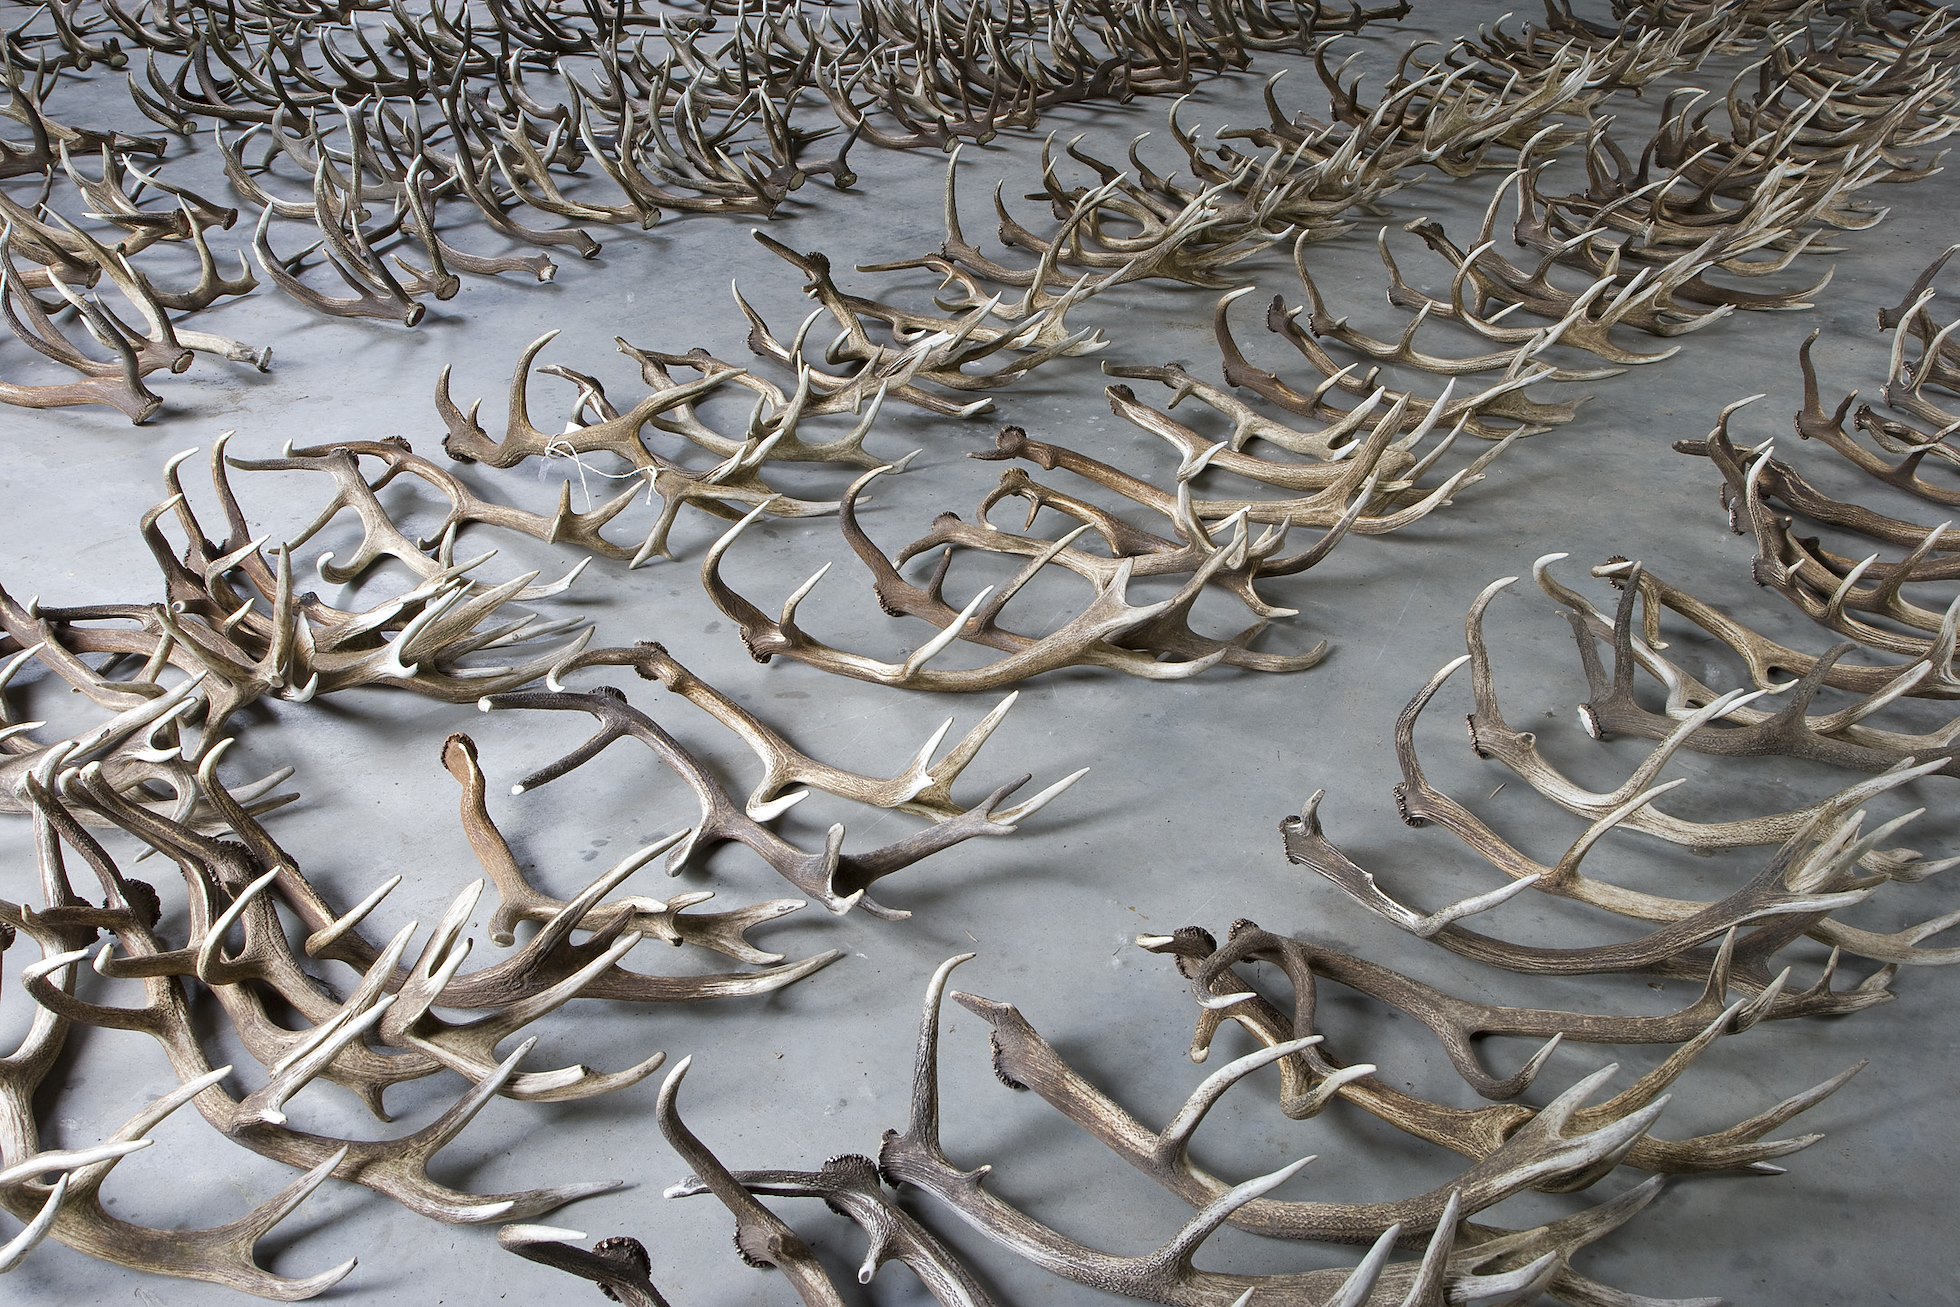 Red deer antlers laid out in prepartation for measuring and weighing as part of statisical analysis to assess the health of the red deer population. Oostvaardersplassen, Netherlands. June. Mission: Oostervaardersplassen, Netherlands, June 2009.
